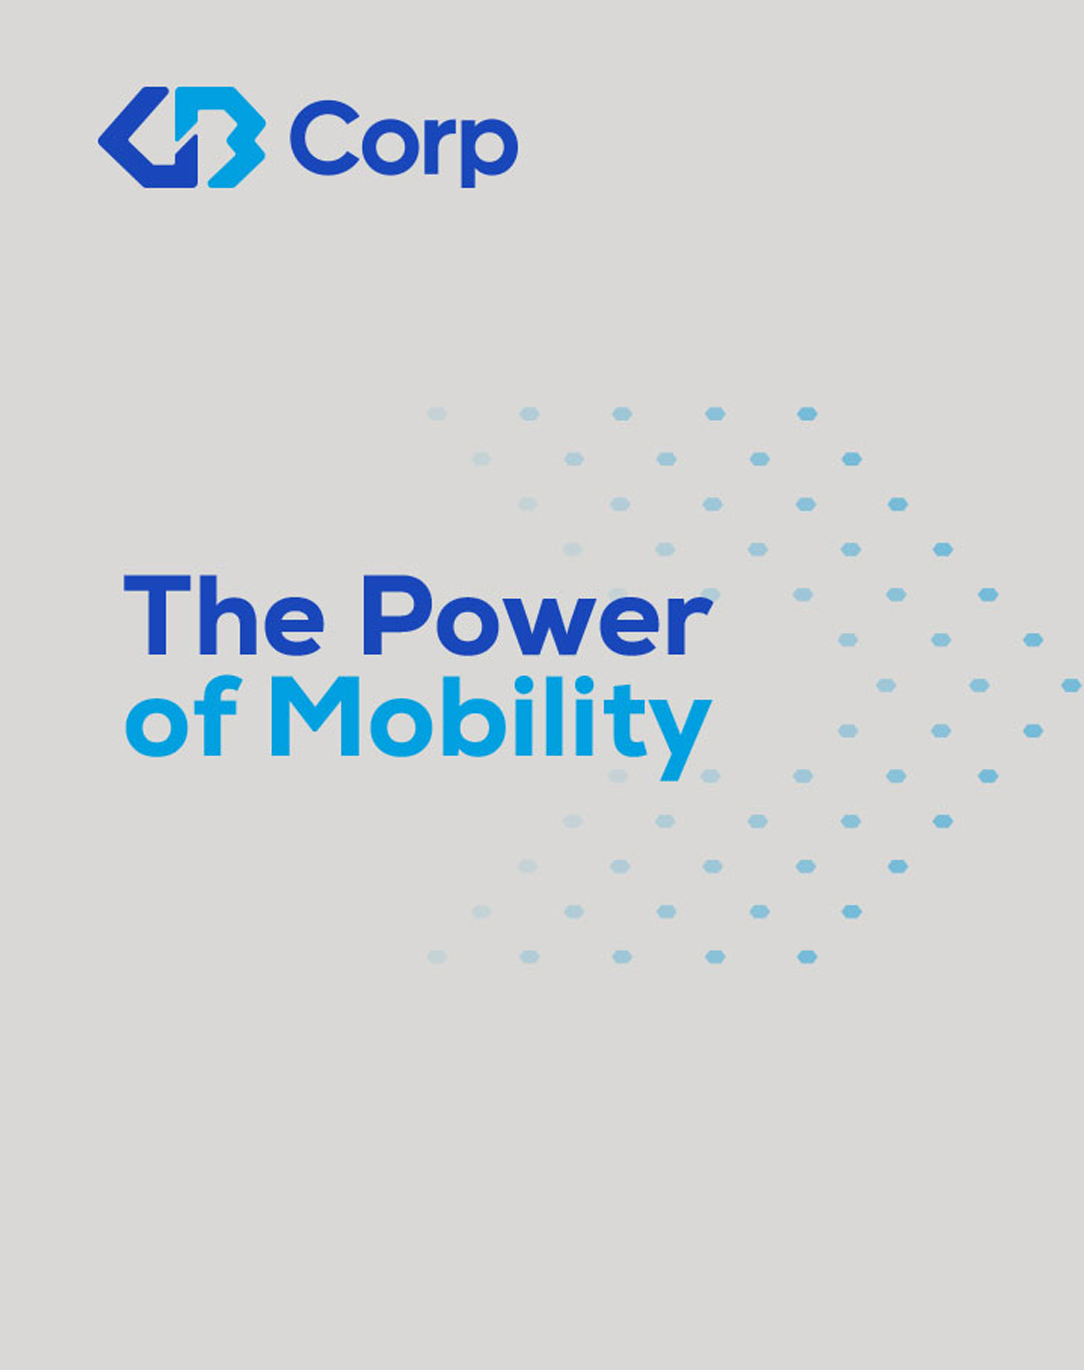 GB Corp - The Power of Mobility